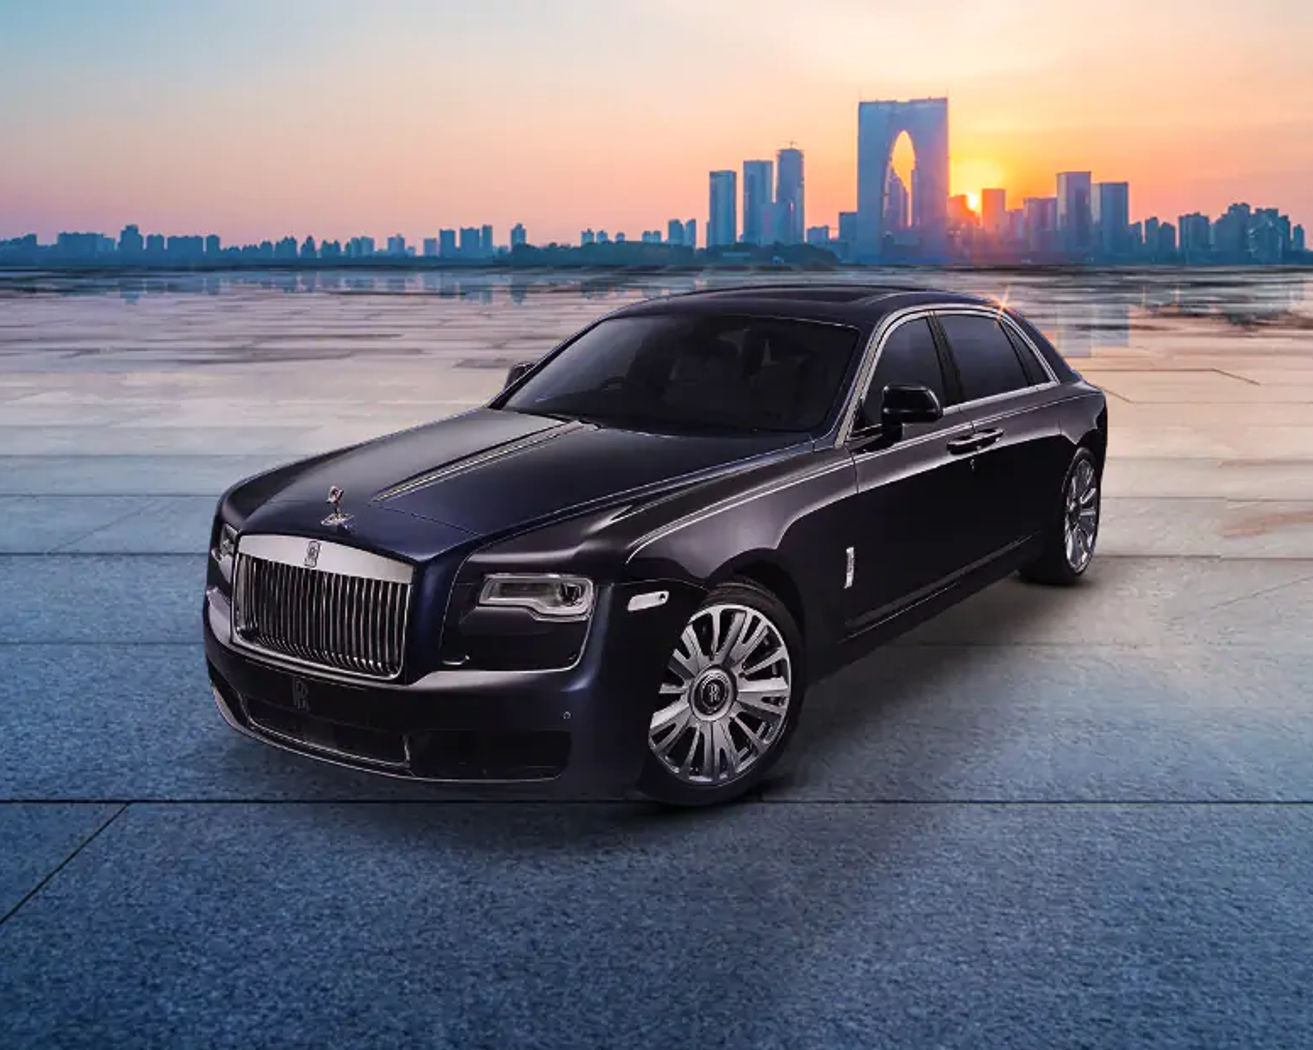 rolls royce ghost price in india